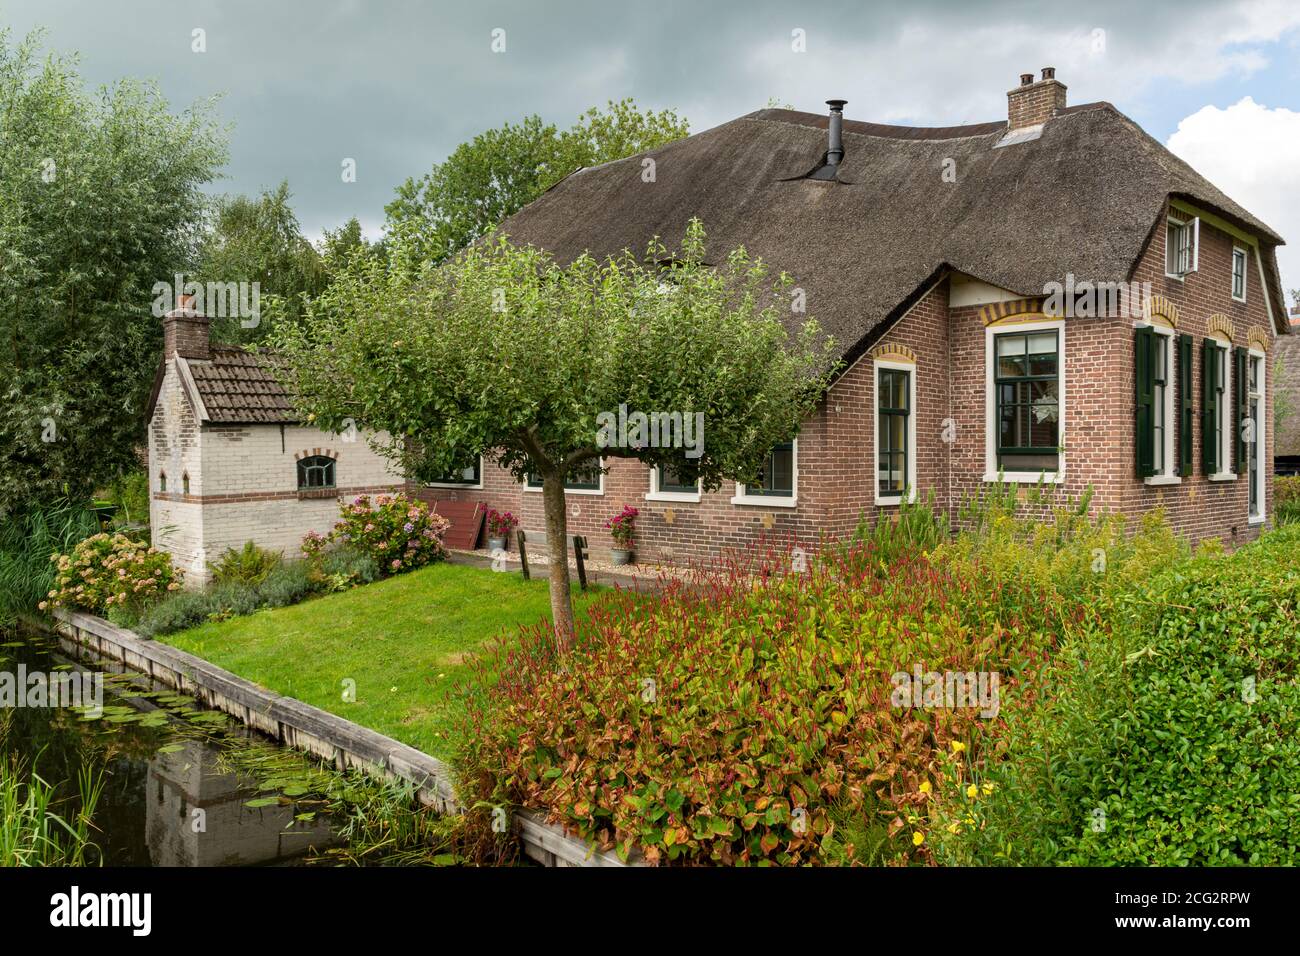 Giethoorn, The Netherlands - August 28, 2020: House with thatched roof at a small canal Stock Photo